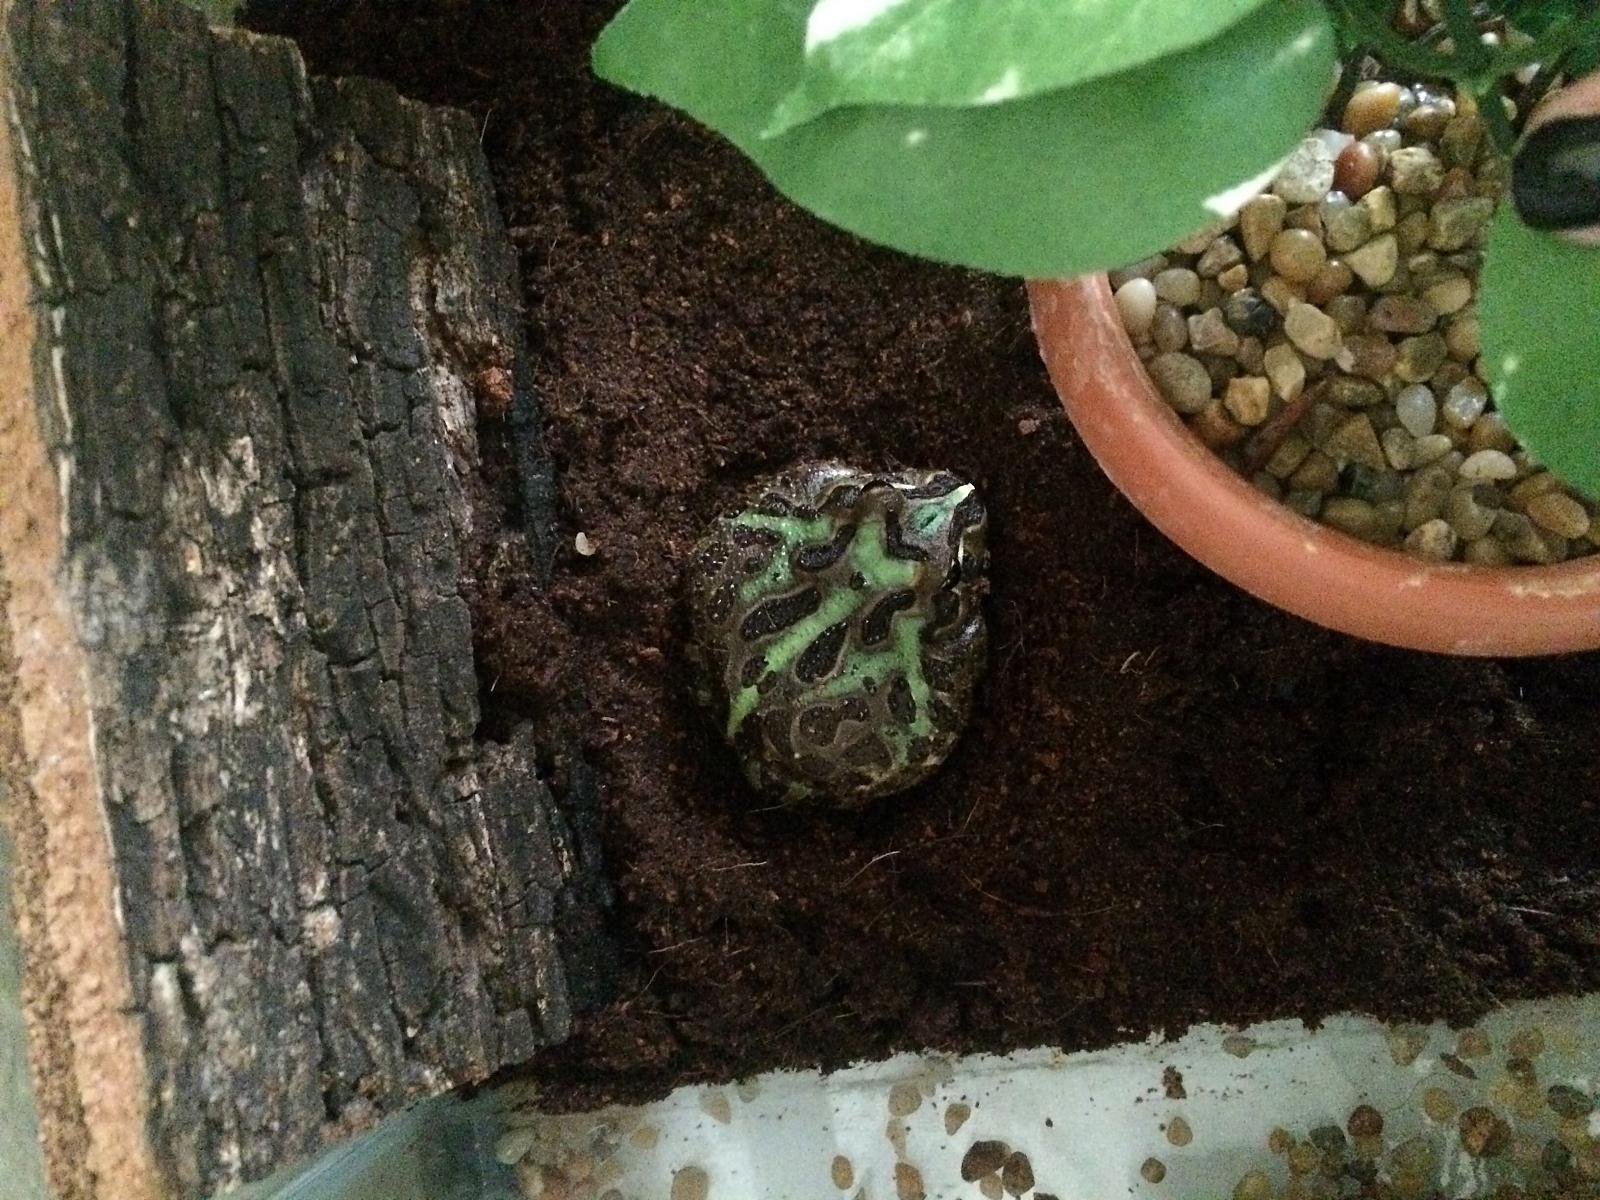 My normal green Pacman frog